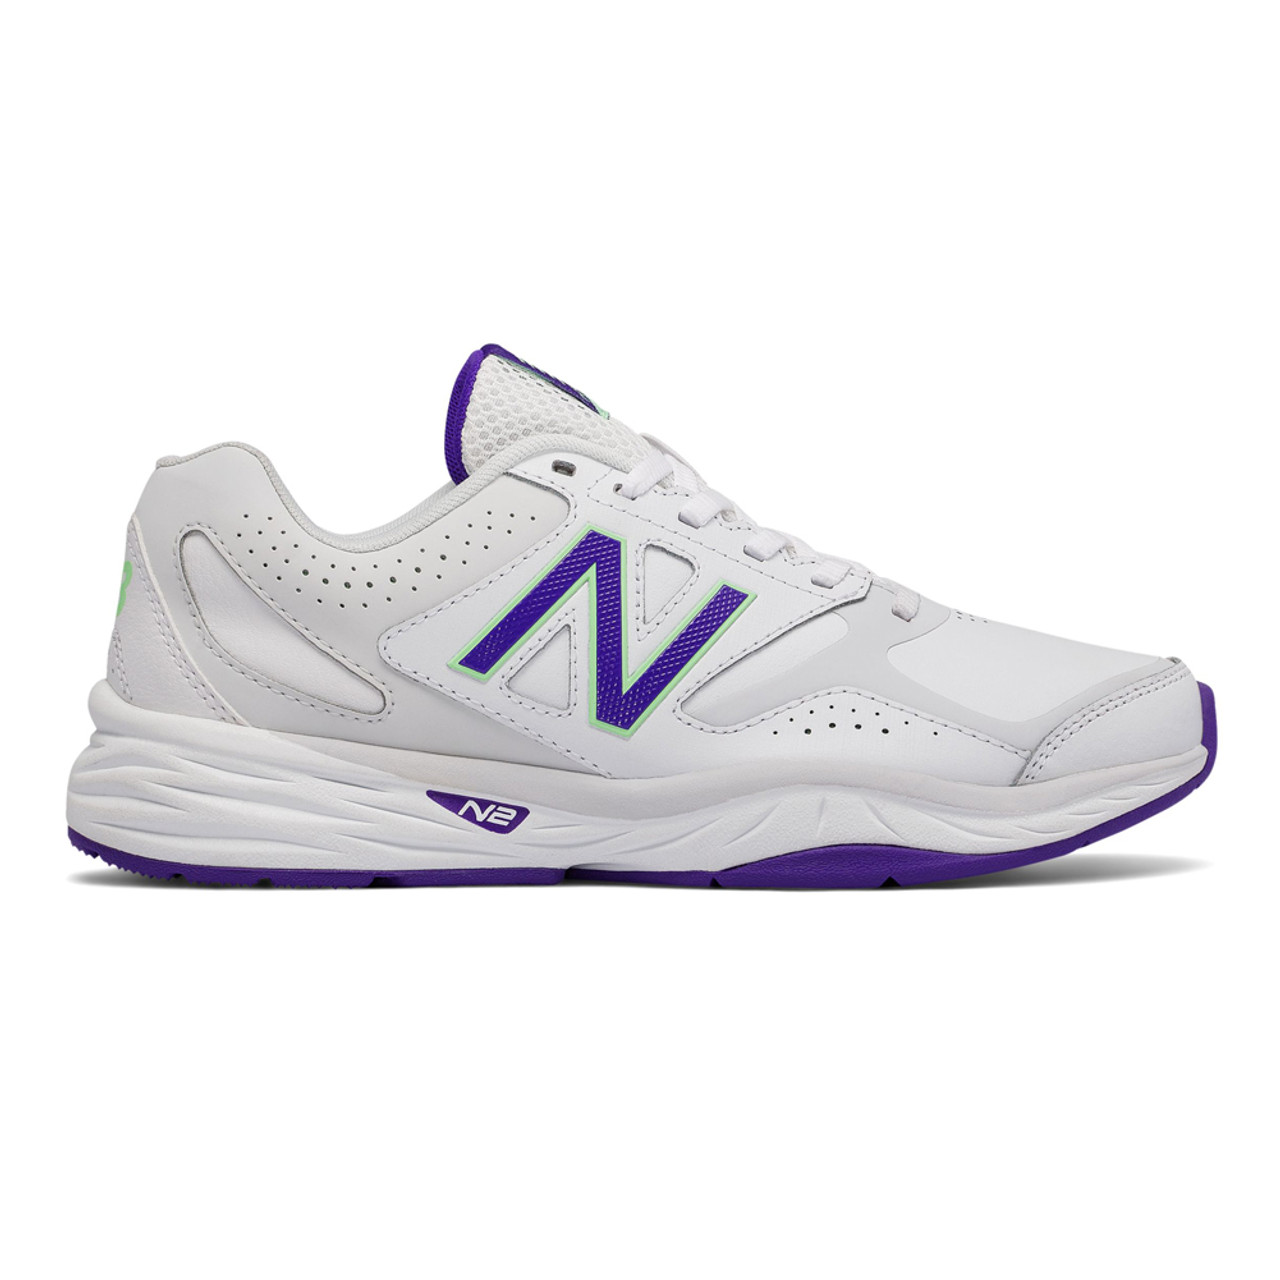 New Women's WX824WV1 Cross Trainer - White | Discount New Balance Ladies Shoes & More - | Shoolu.com